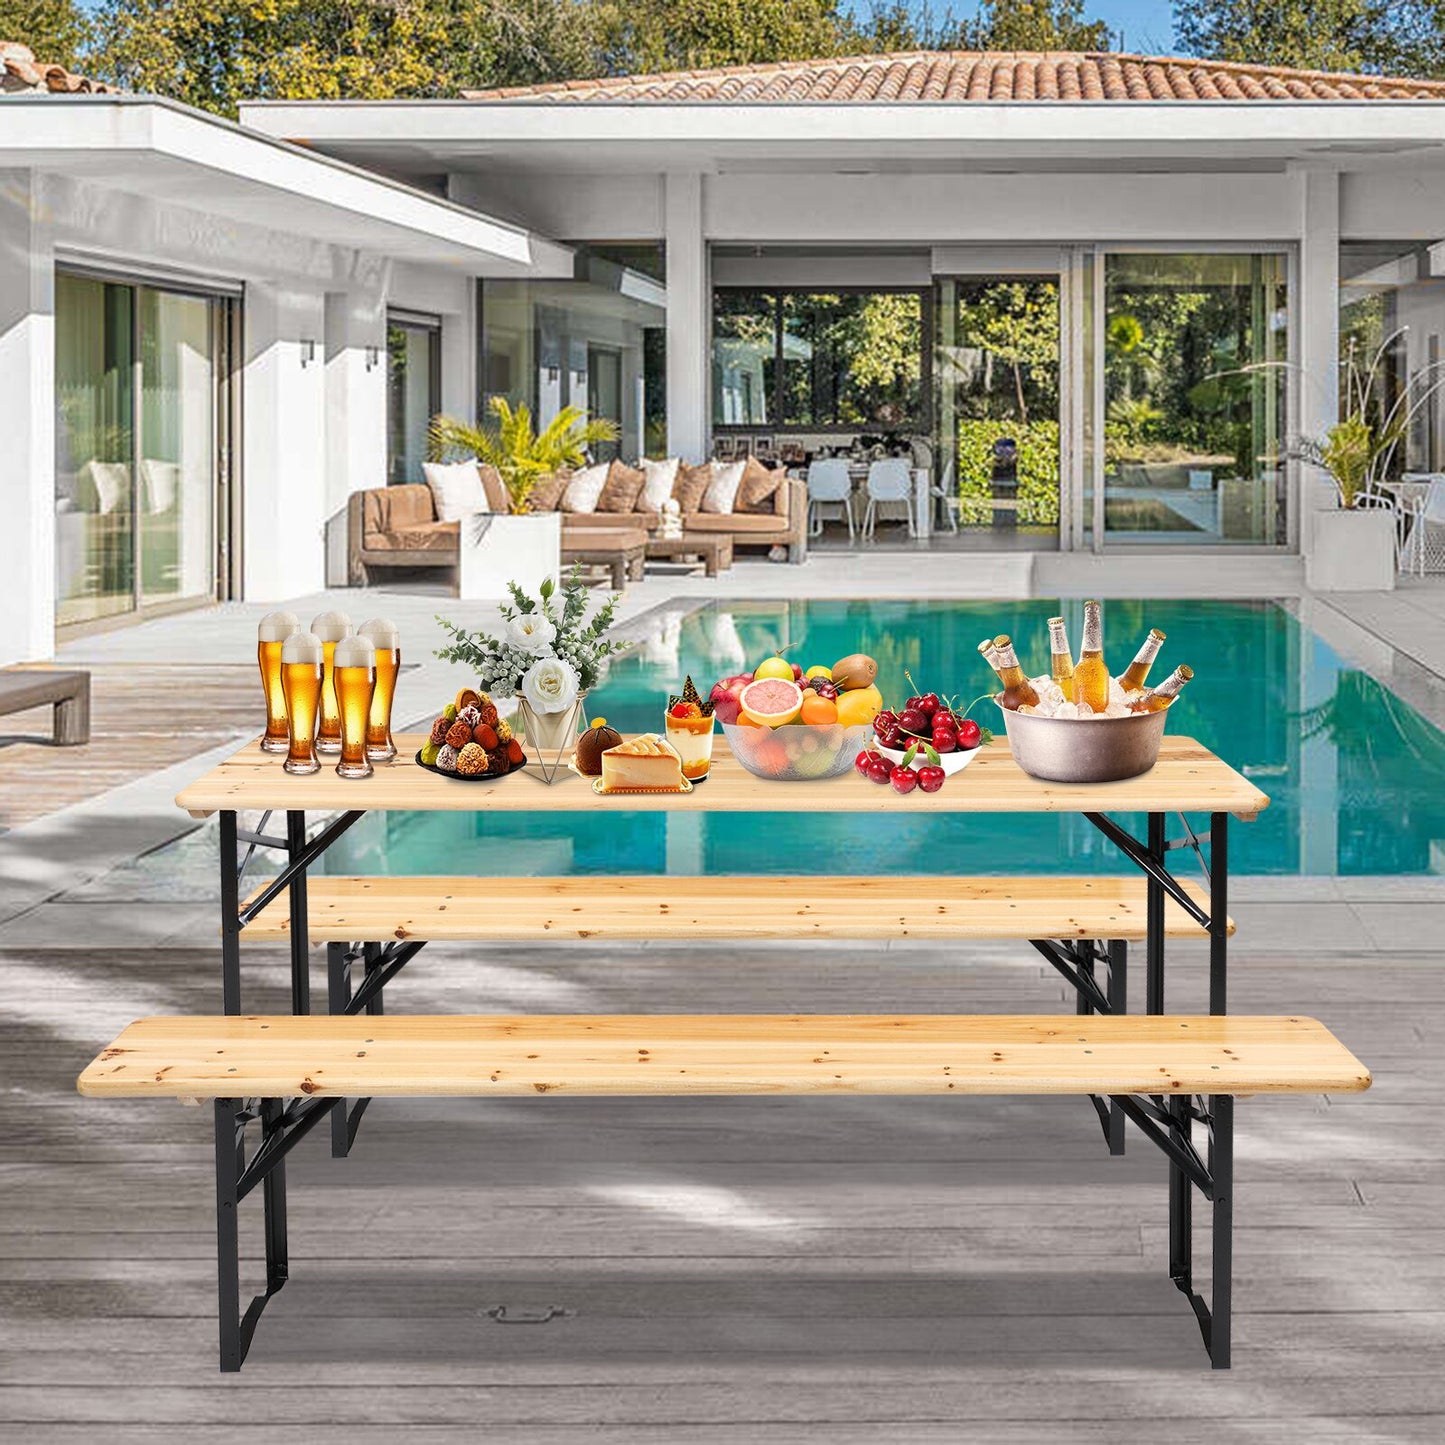 folding table in outdoor setting by pool